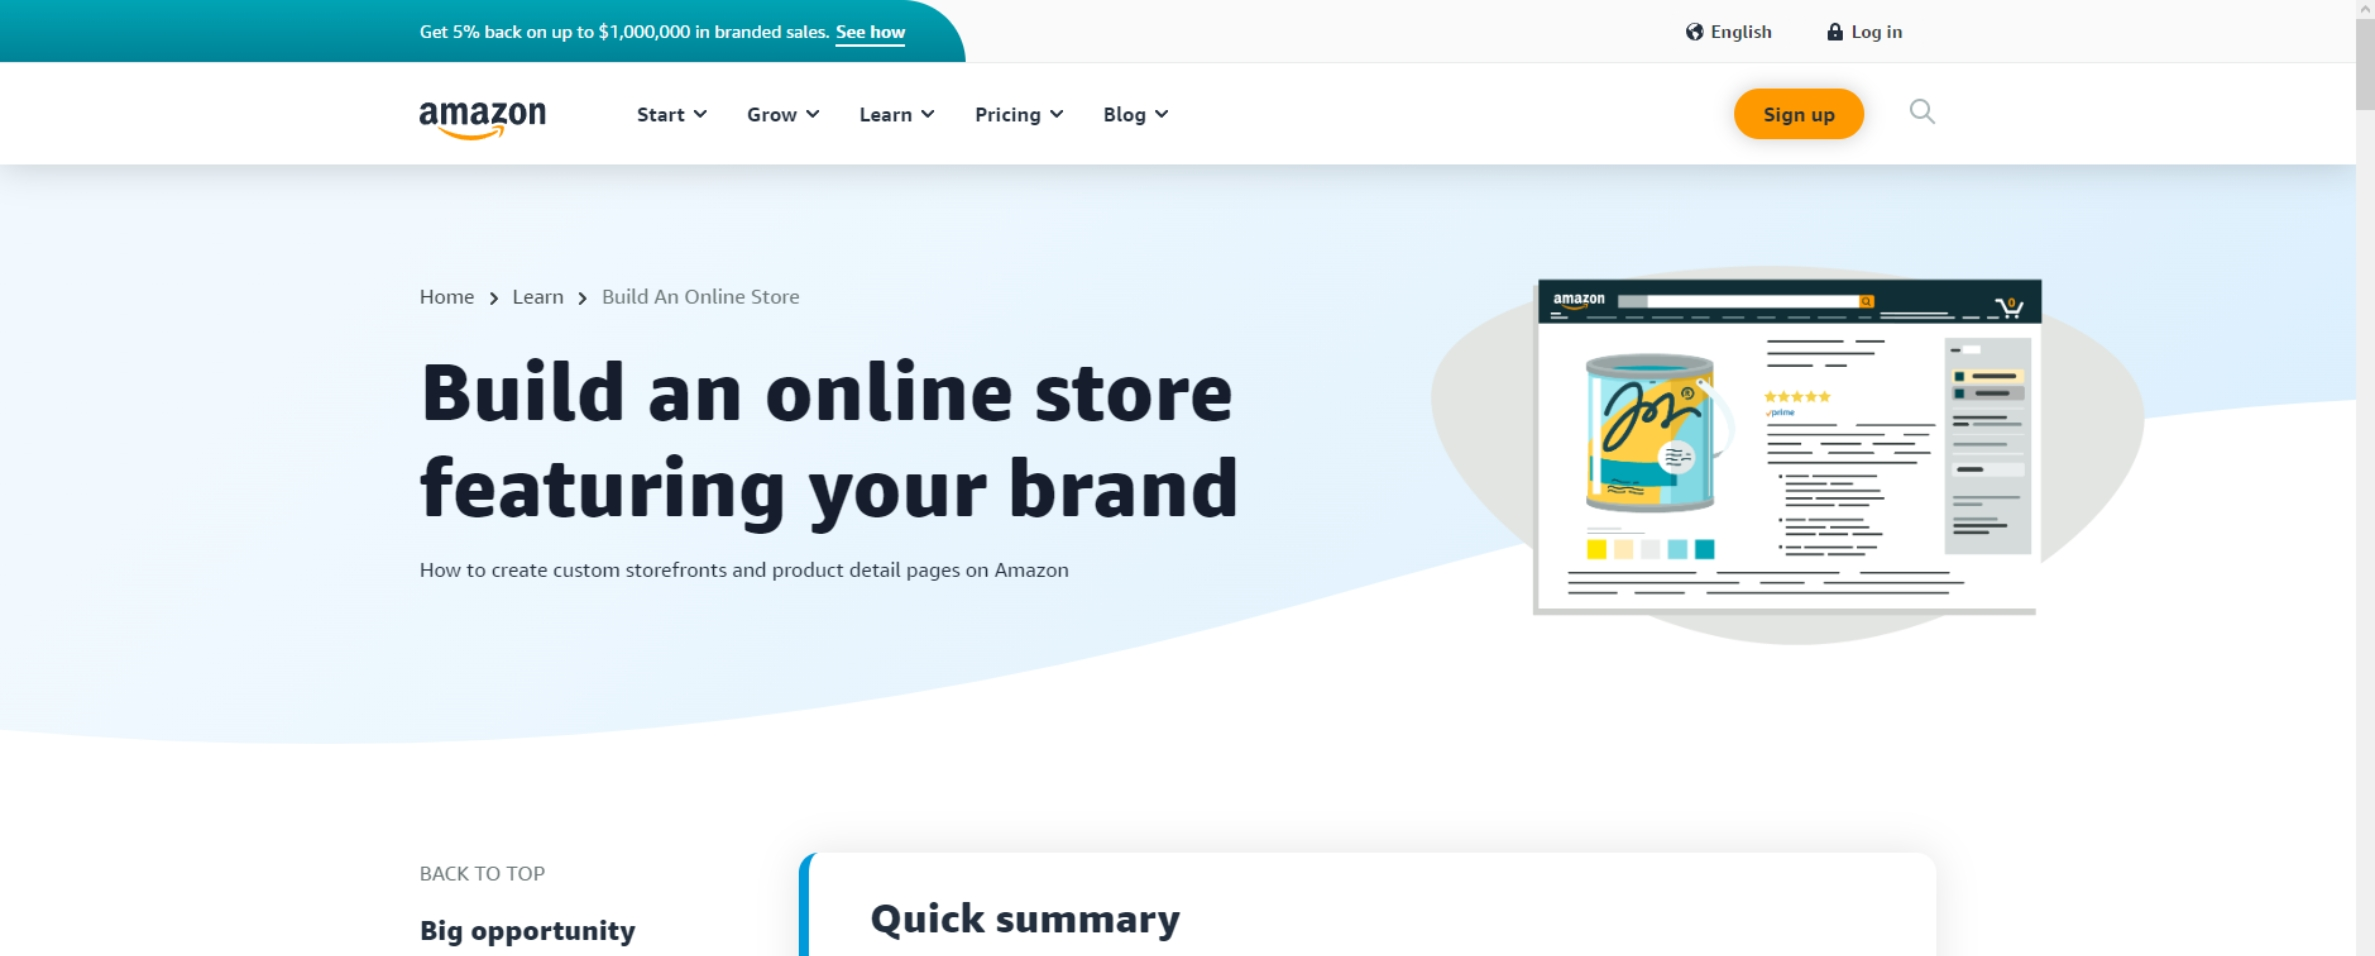 Build an online store with your brand on Amazon. 